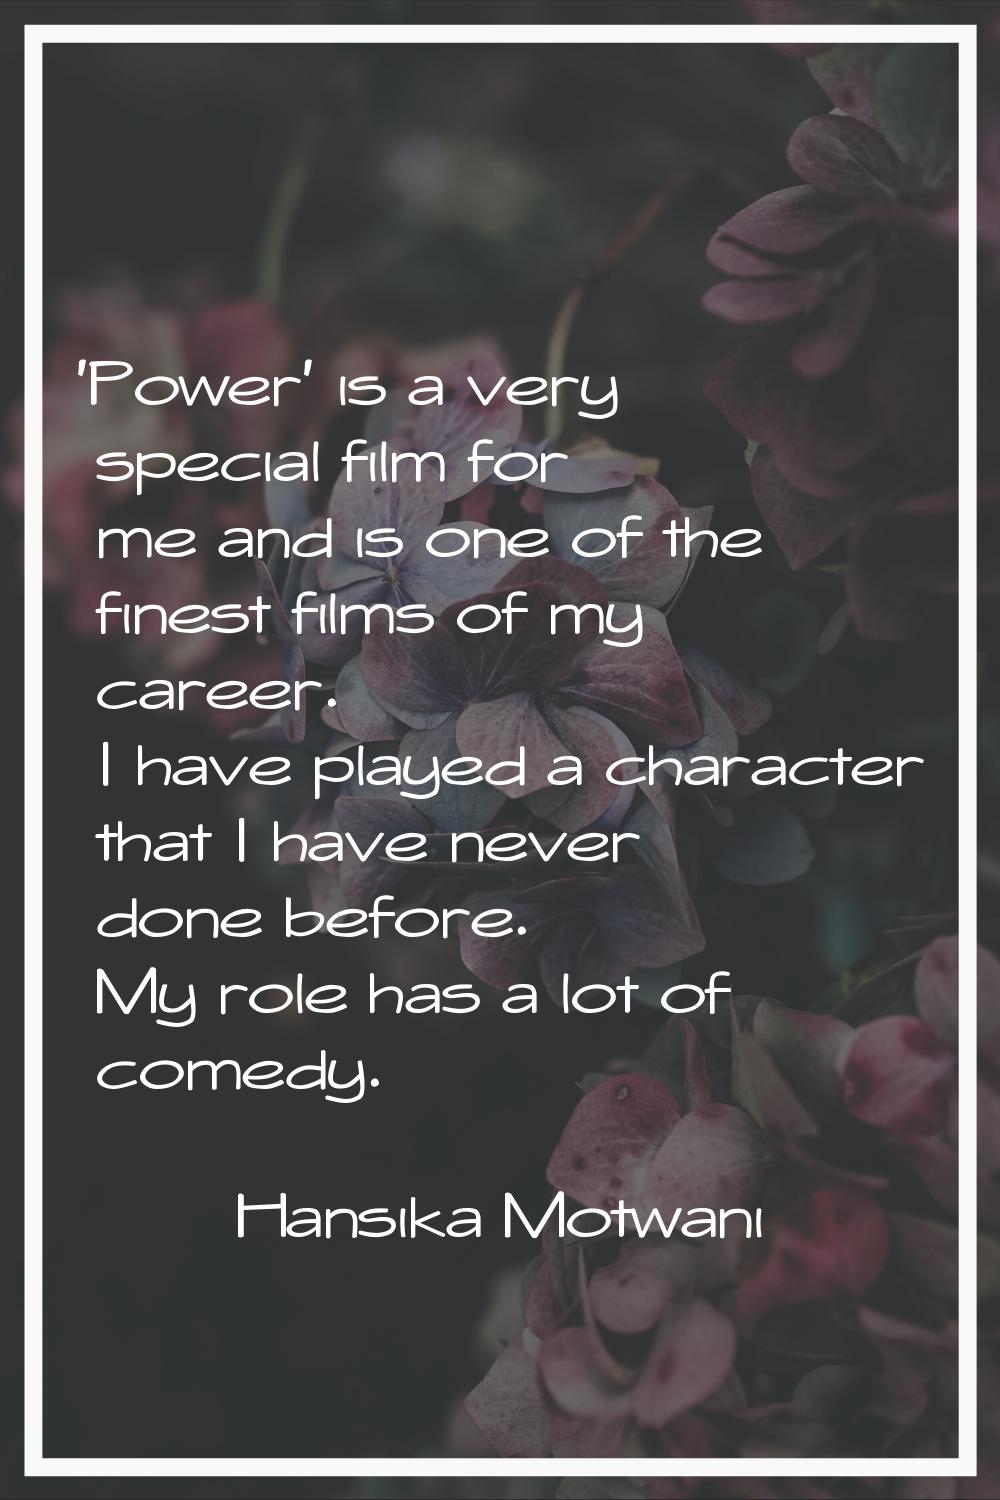 'Power' is a very special film for me and is one of the finest films of my career. I have played a 